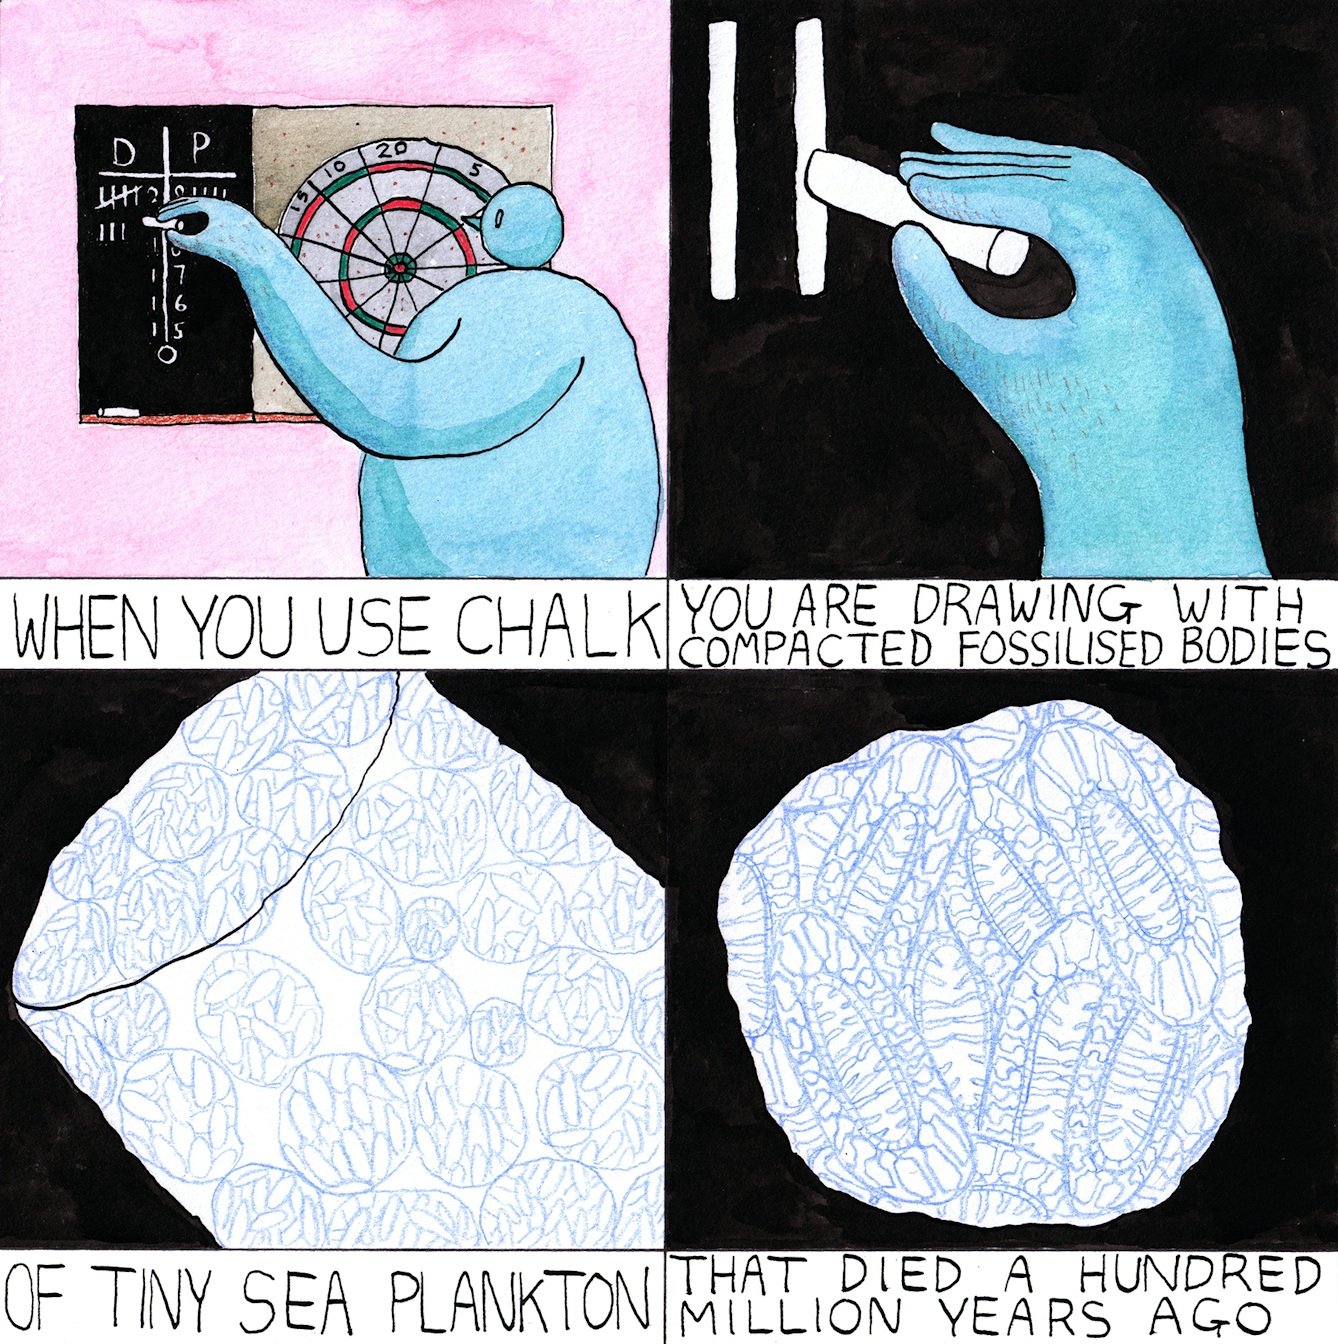 Chalk comic by Rob Bidder with four slides. The first slide shows someone tallying scores using chalk, and subsequent slides show the chalk in more detail. The final slide displays the chalk in microscopic detail to reveal the fossilised sea plankton.